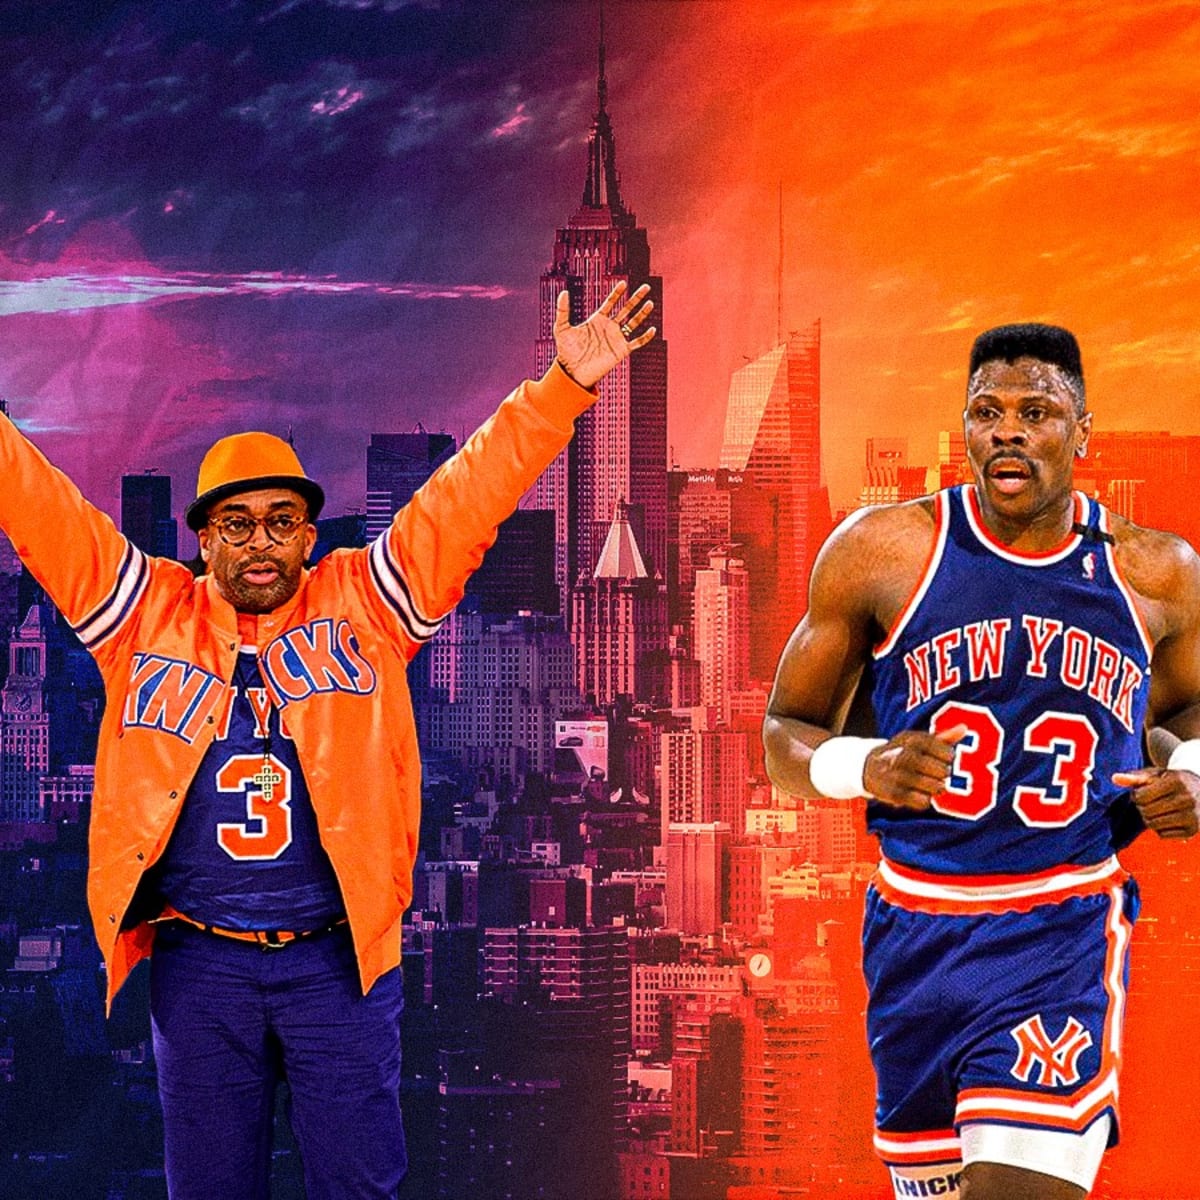 Filmmaker Spike Lee done with attending New York Knicks games for